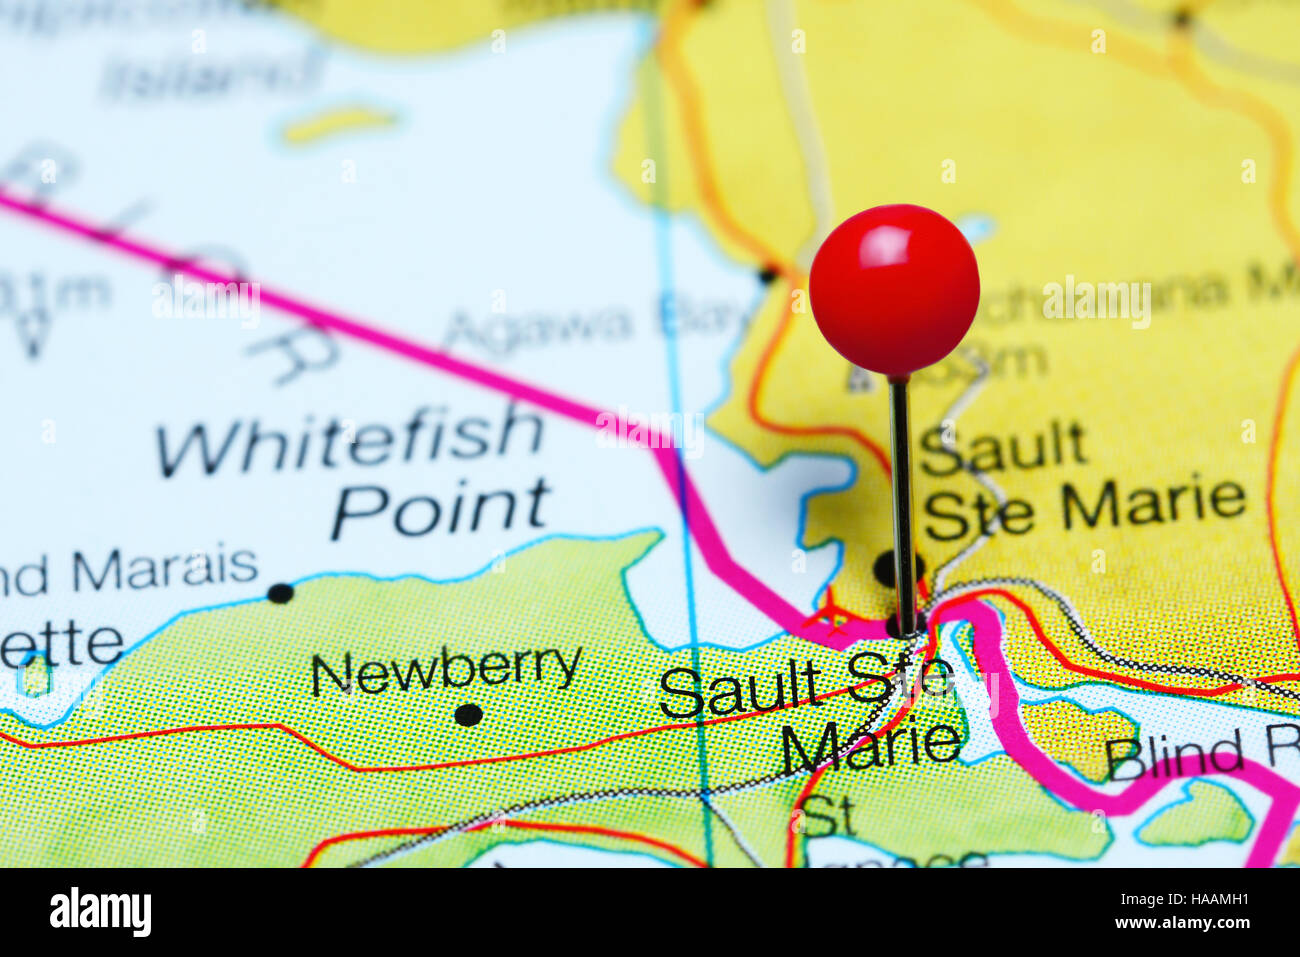 Sault Ste Marie pinned on a map of Michigan, USA Stock Photo